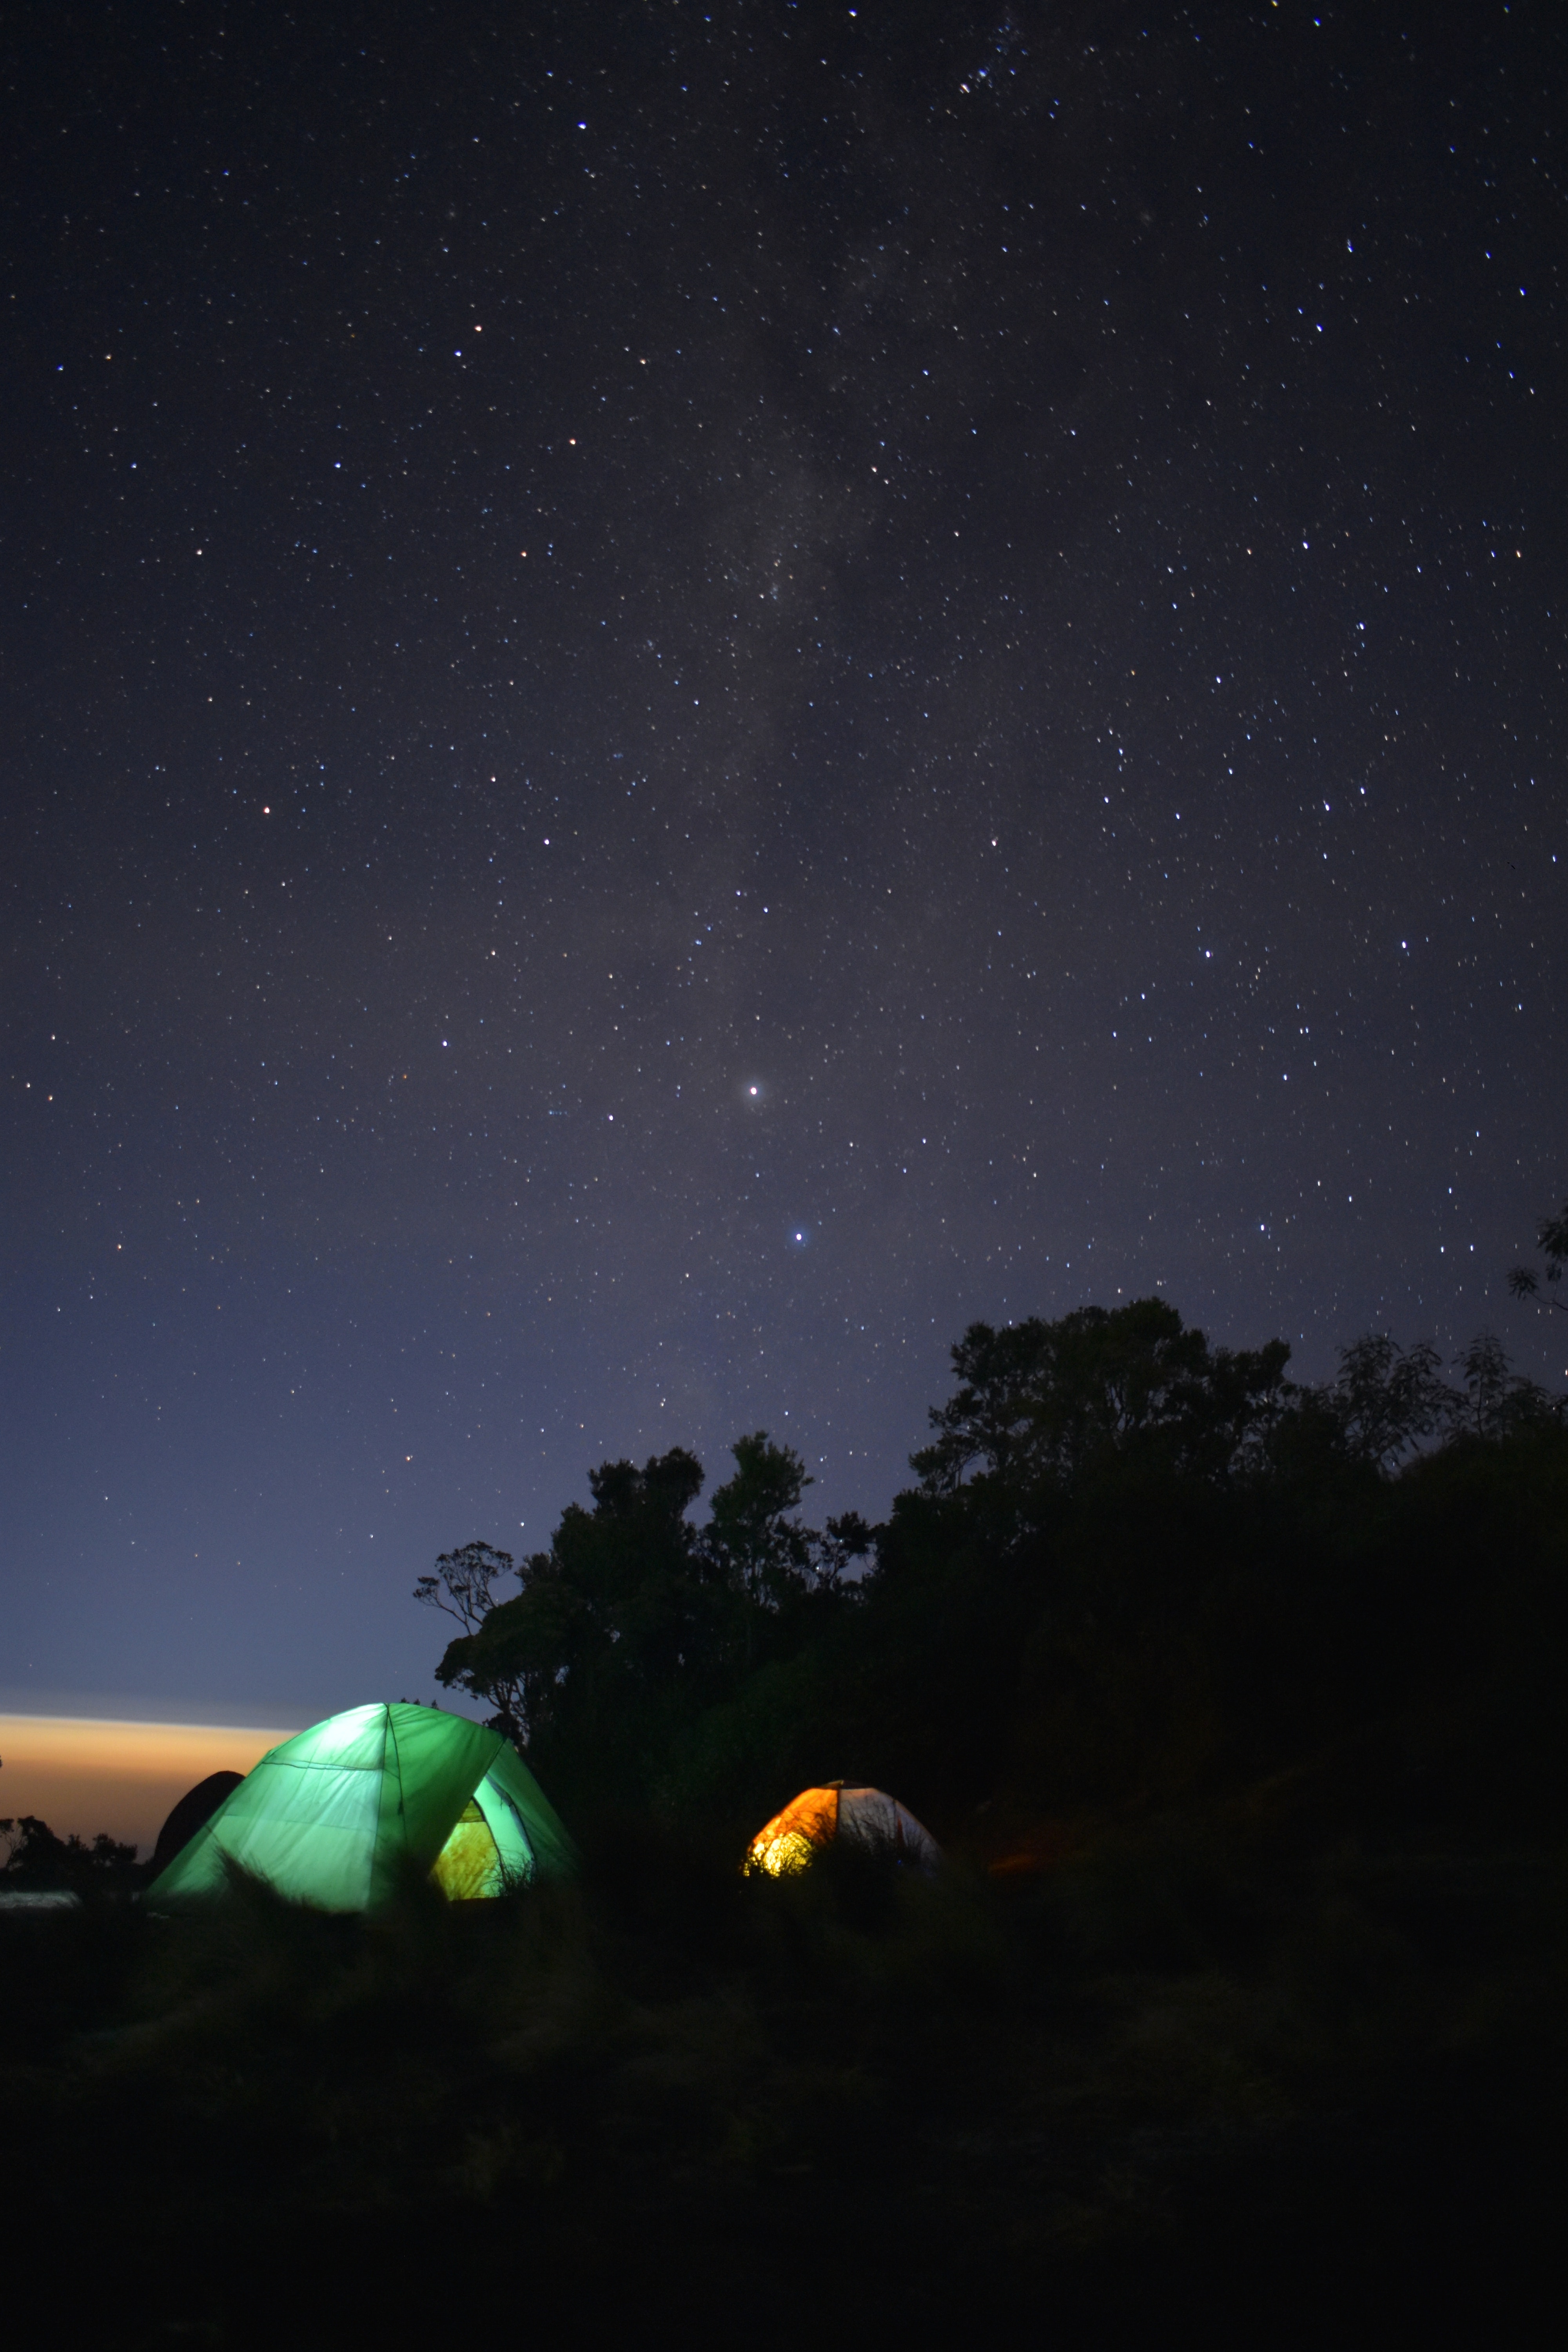 Green and orange dome tents surrounded by trees under a night sky